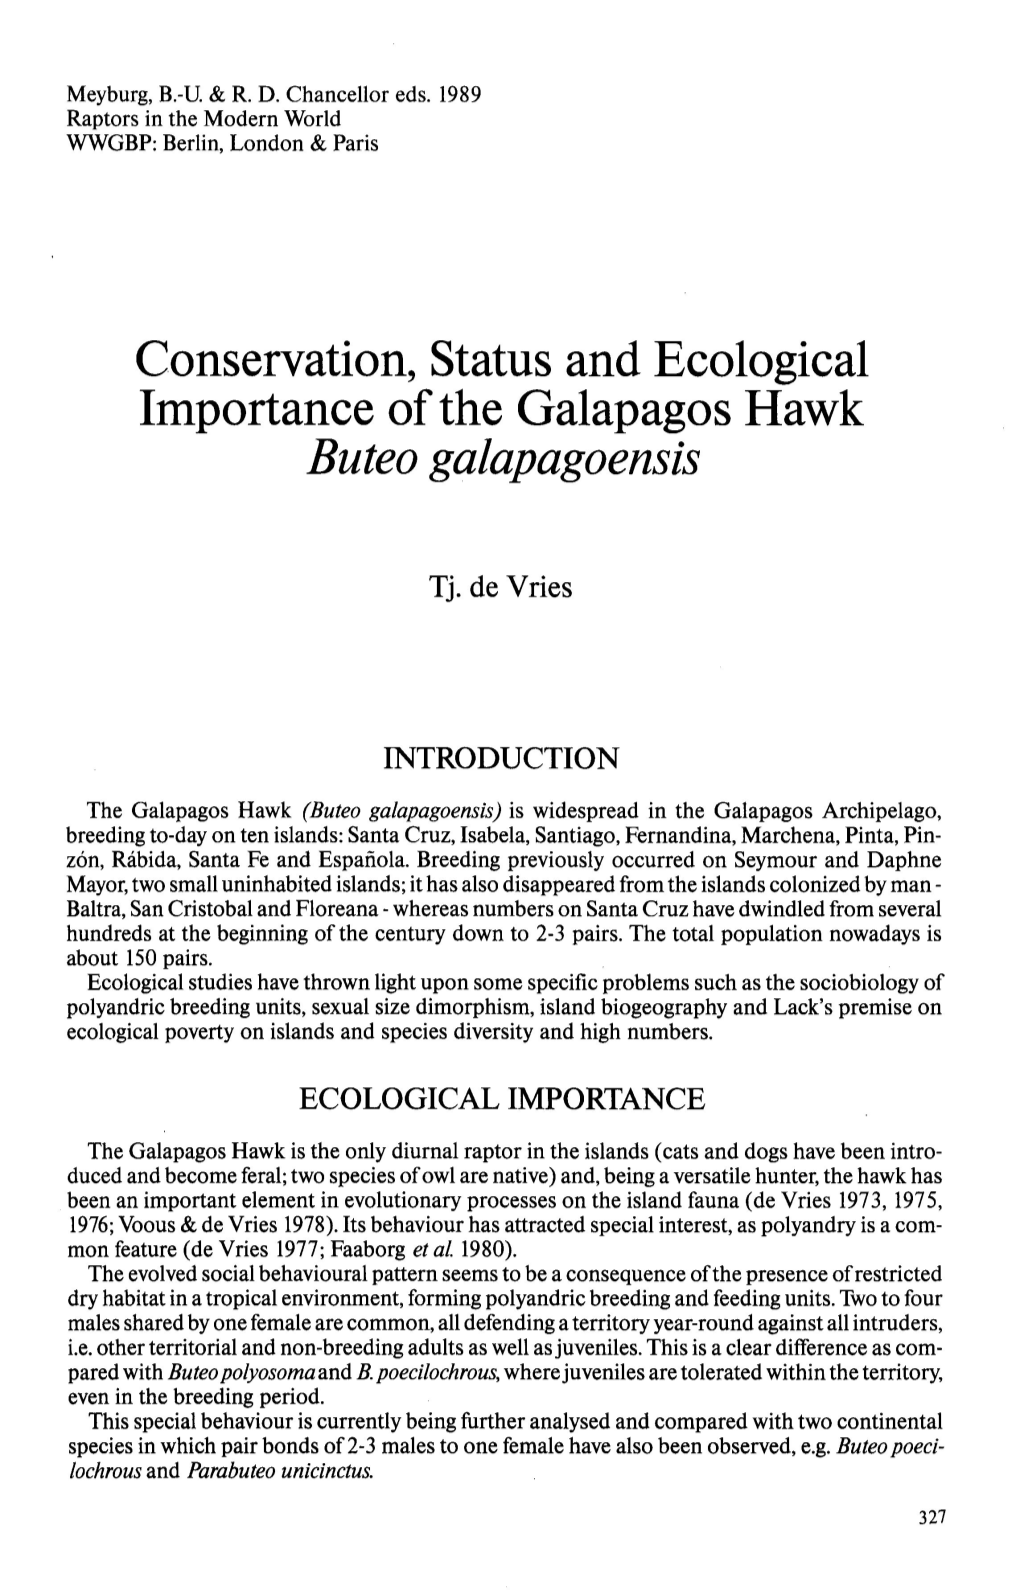 Conservation, Status and Ecological Importance of the Galapagos Hawk Buteo Galapagoensis